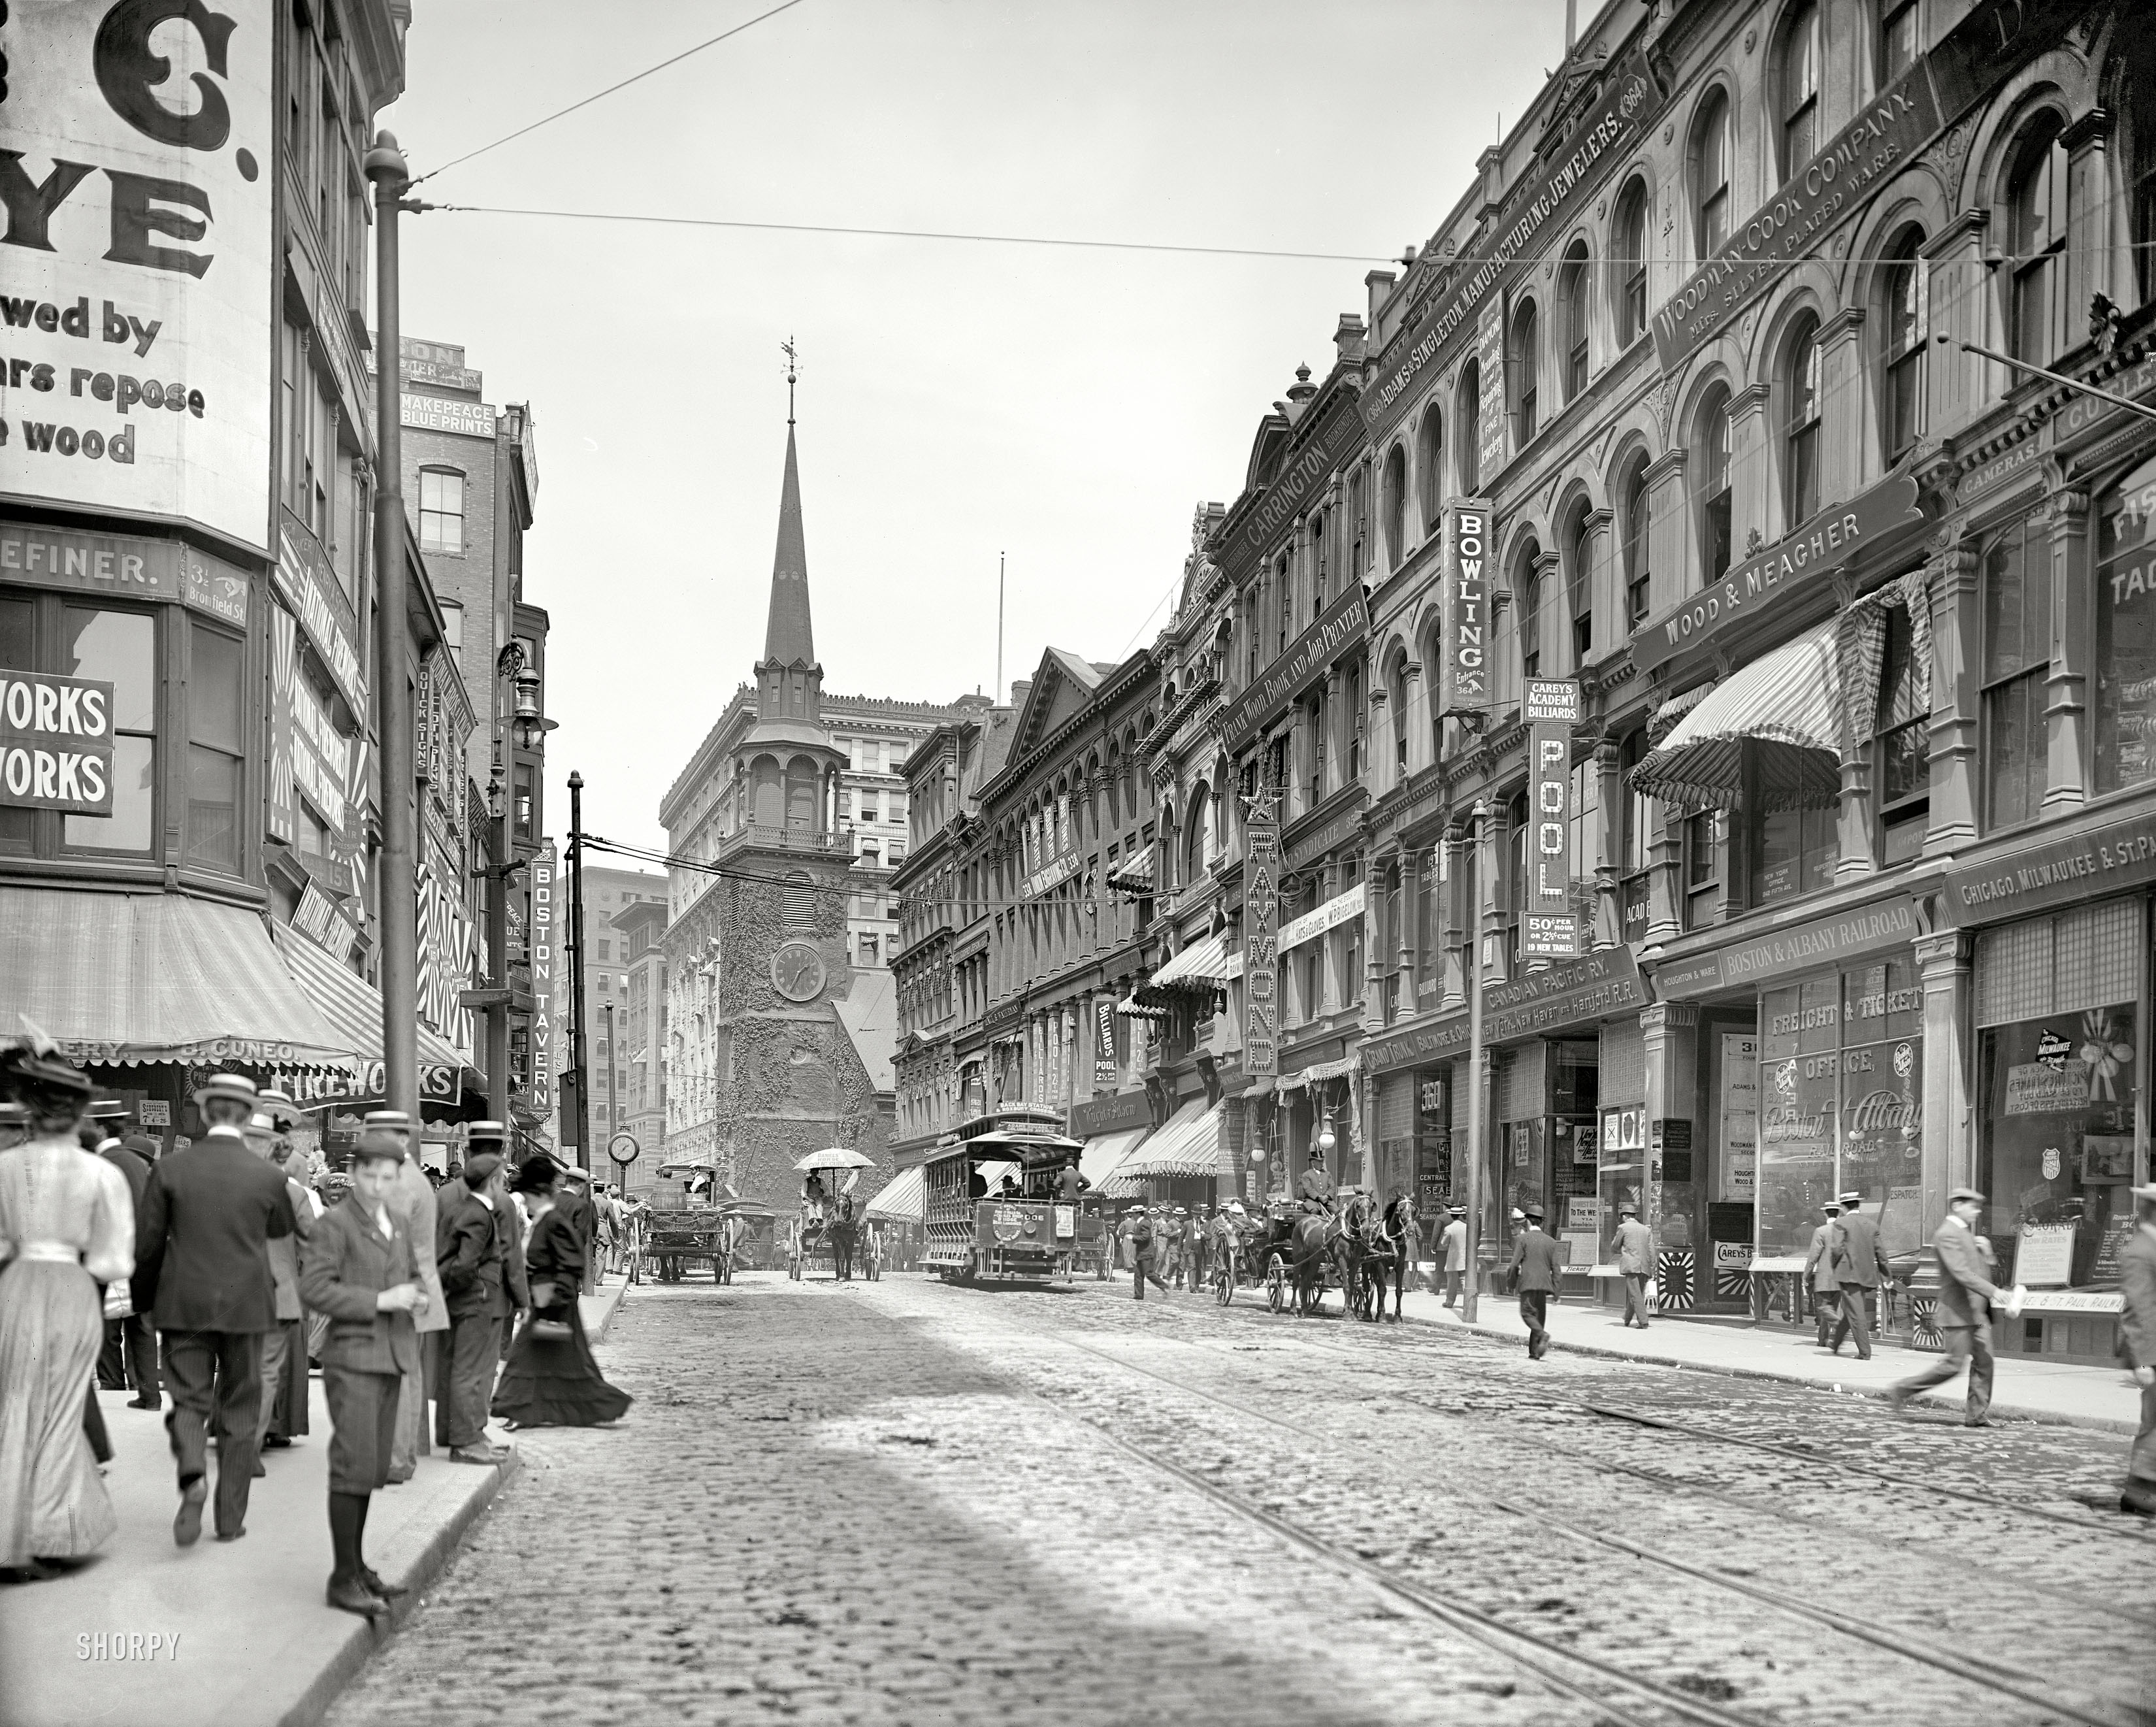 Boston circa 1906. "Washington Street." On our left: National Fireworks. 8x10 inch dry plate glass negative, Detroit Publishing Company. View full size.